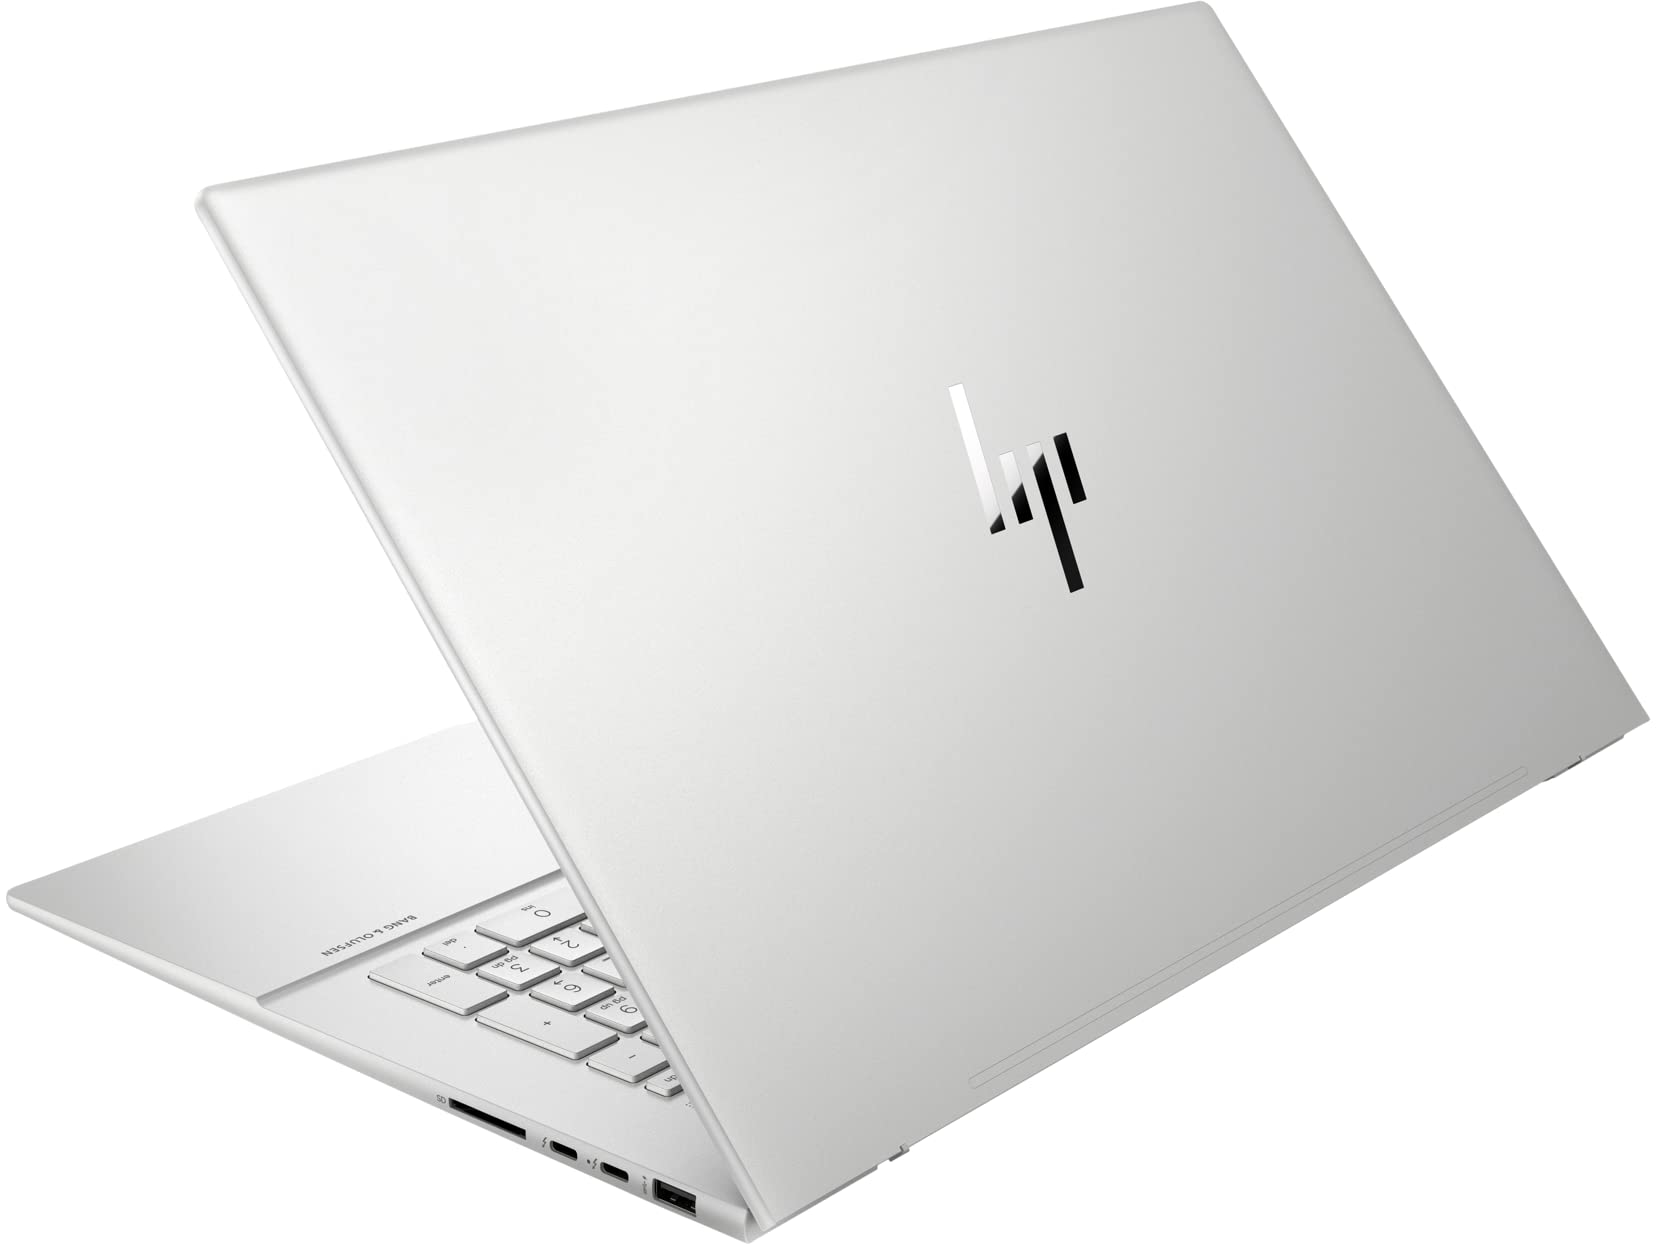 HP Envy 17.3 Inch FHD Touchscreen Business Laptop, 12th Gen i7-1260P, 64GB RAM, 2TB SSD, Windows 11 Pro, Thunderbolt 4, Backlit Keyboard, 10 Number Key, SD Card Reader, Silver, PCM